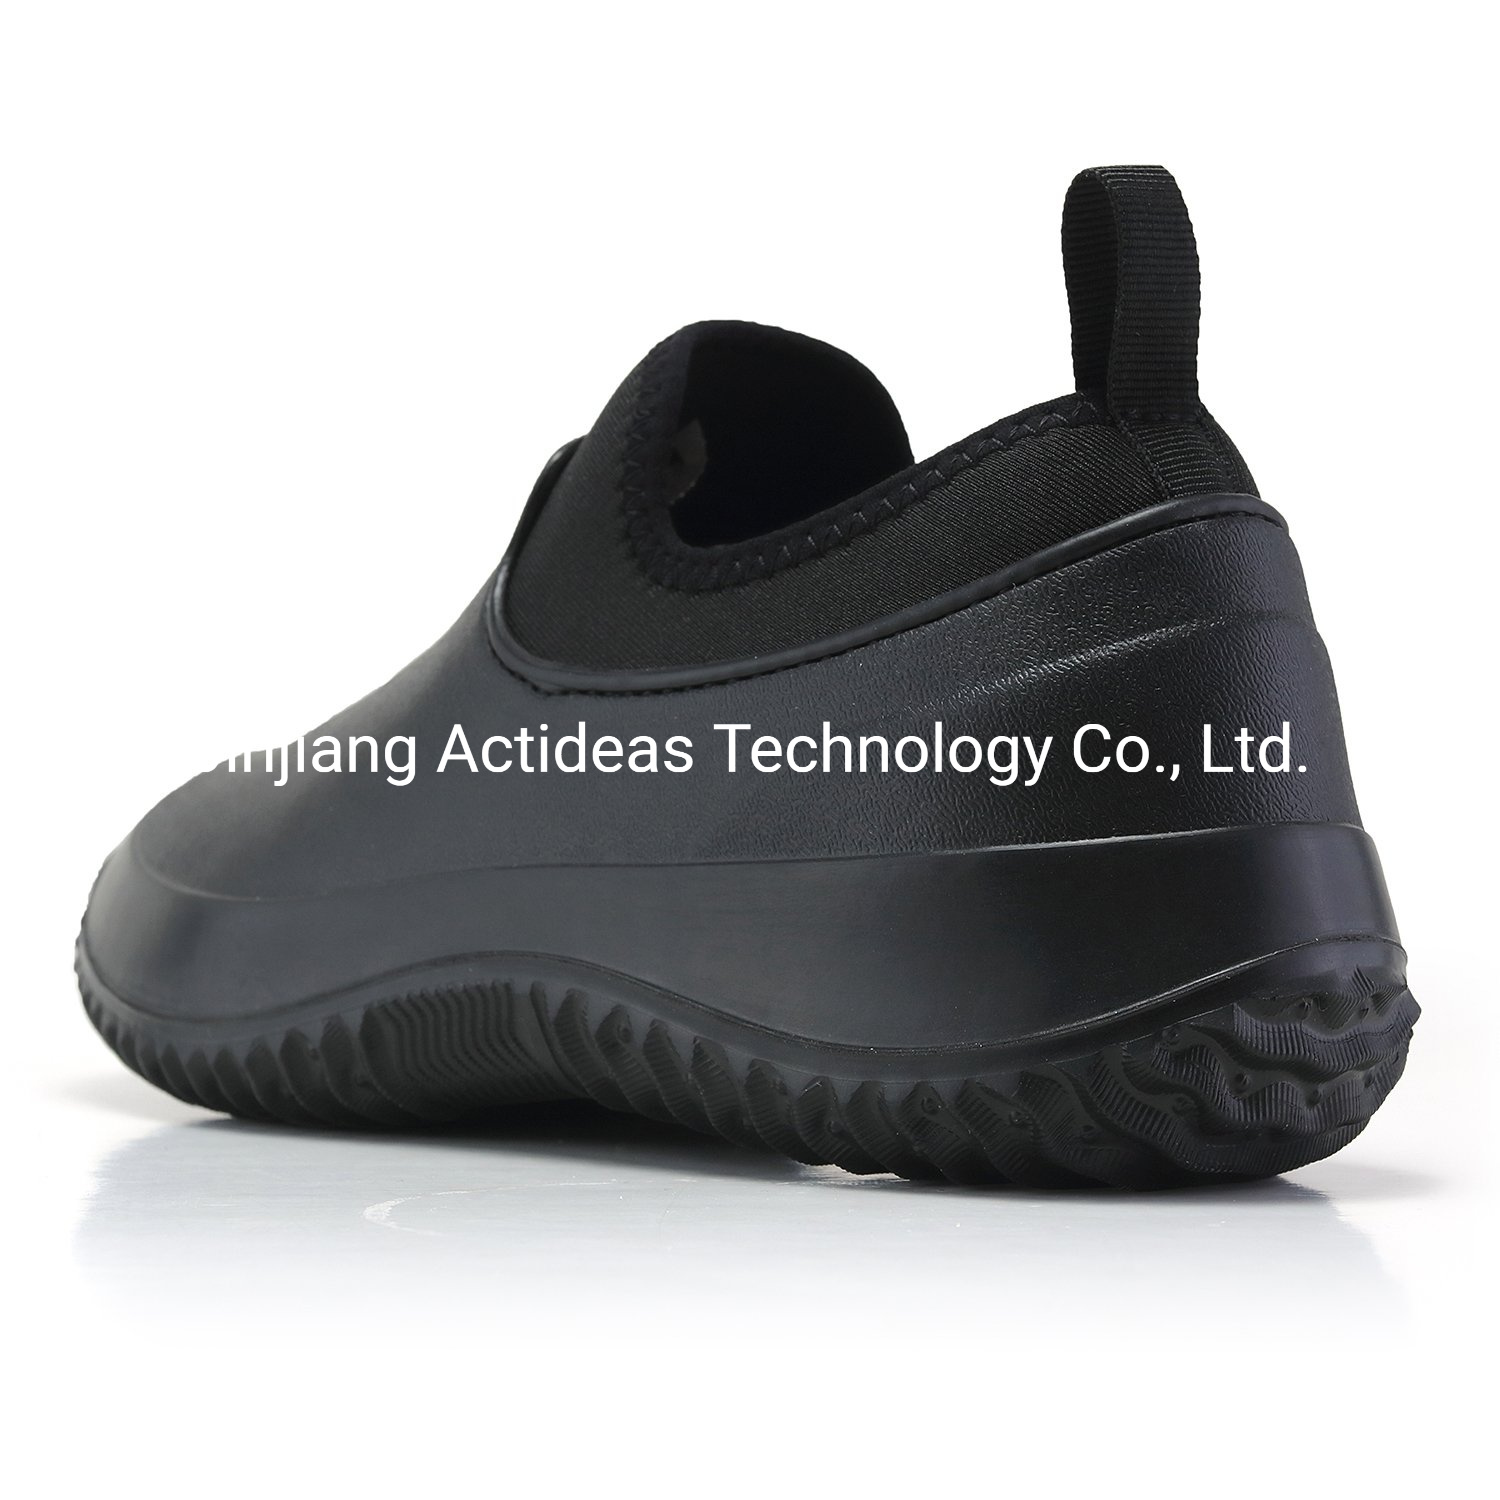 2021 New High Quality Winter Shoes Leather Footwear Sneaker Shoes